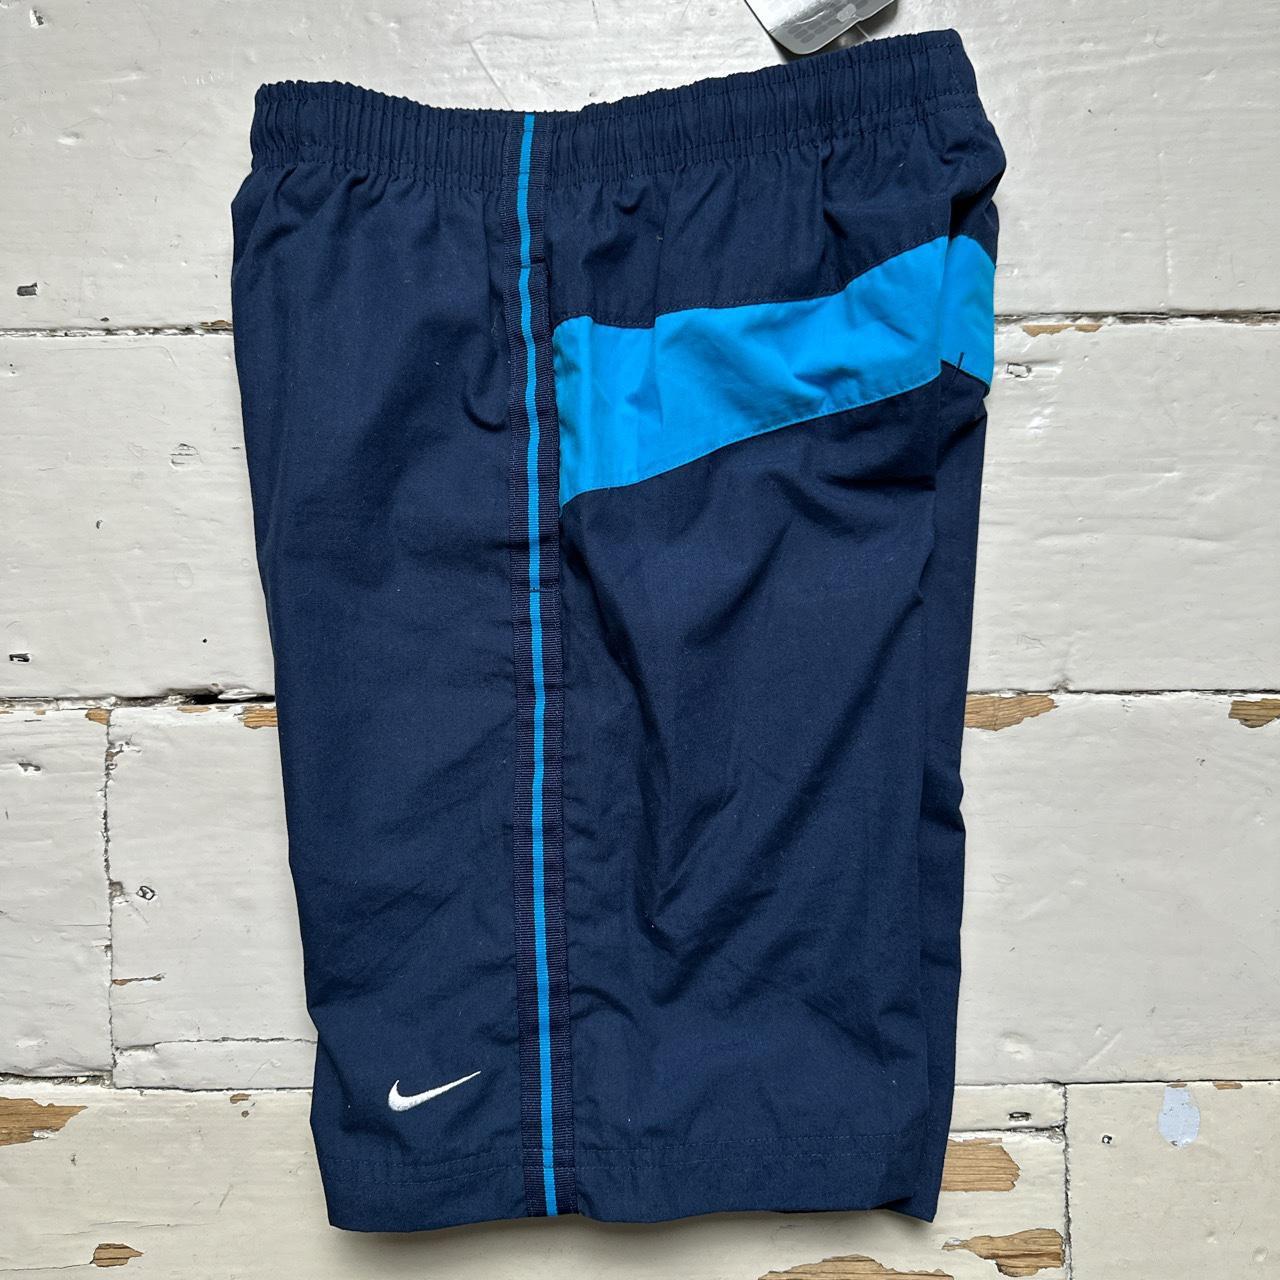 Nike Vintage Shell Track Pant Shorts Navy and Blue